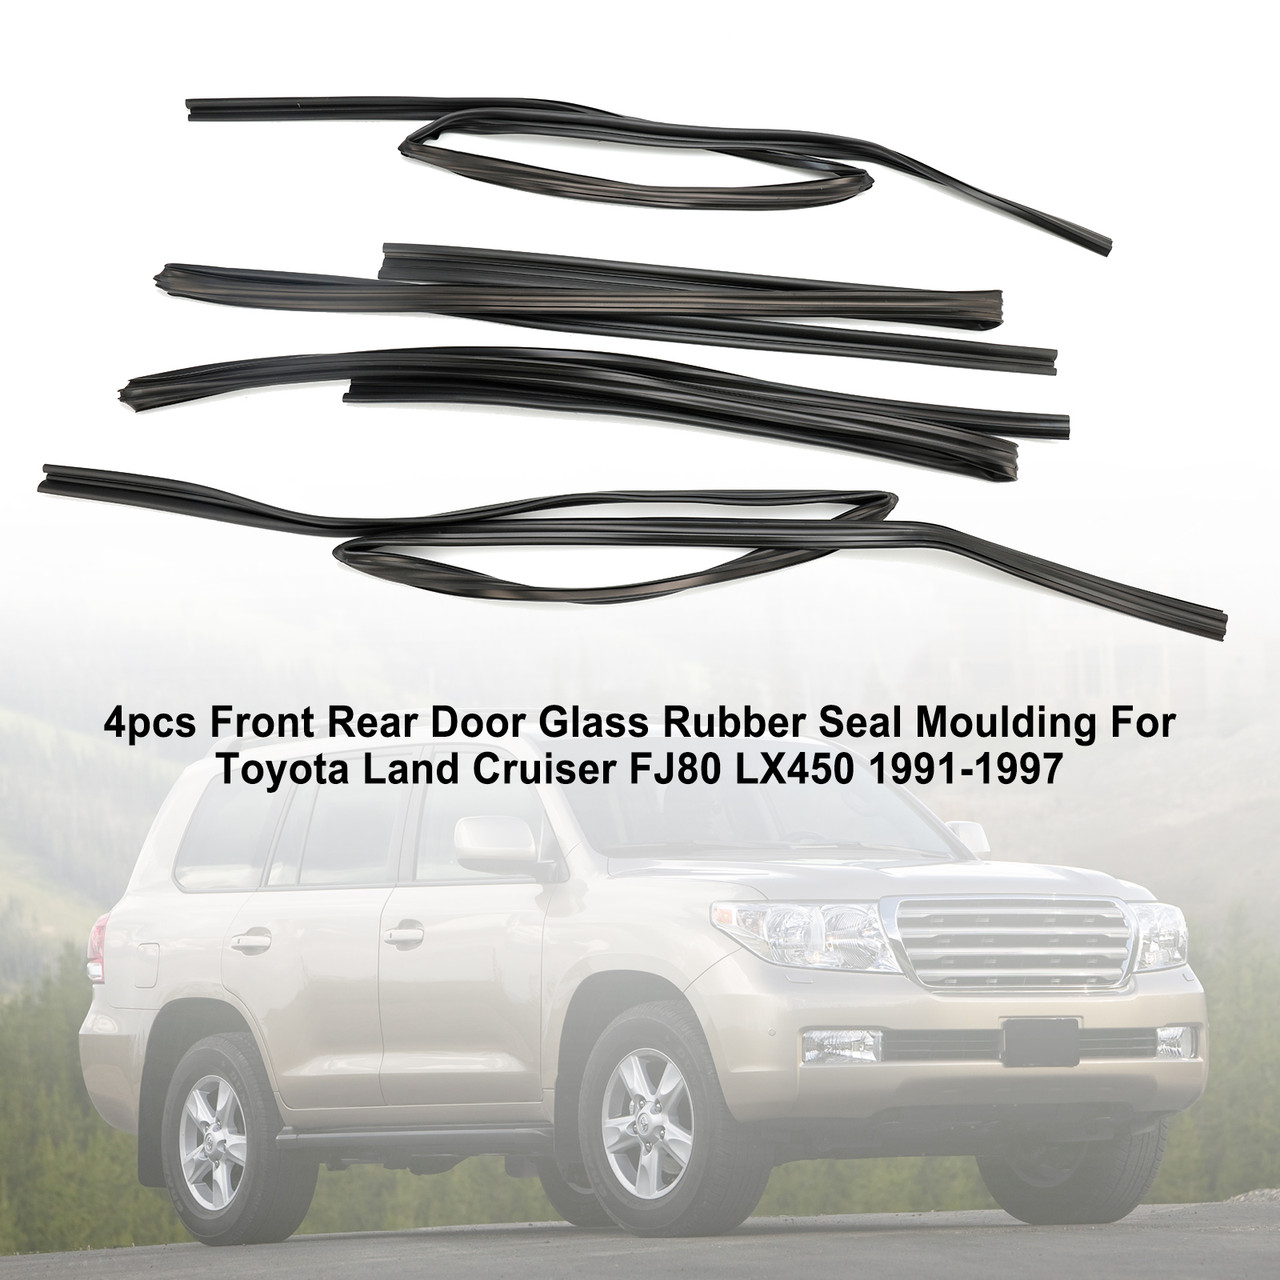 6814160010 1992 Toyota Land Cruiser 4pcs Front Rear Door Glass Rubber Seal Moulding